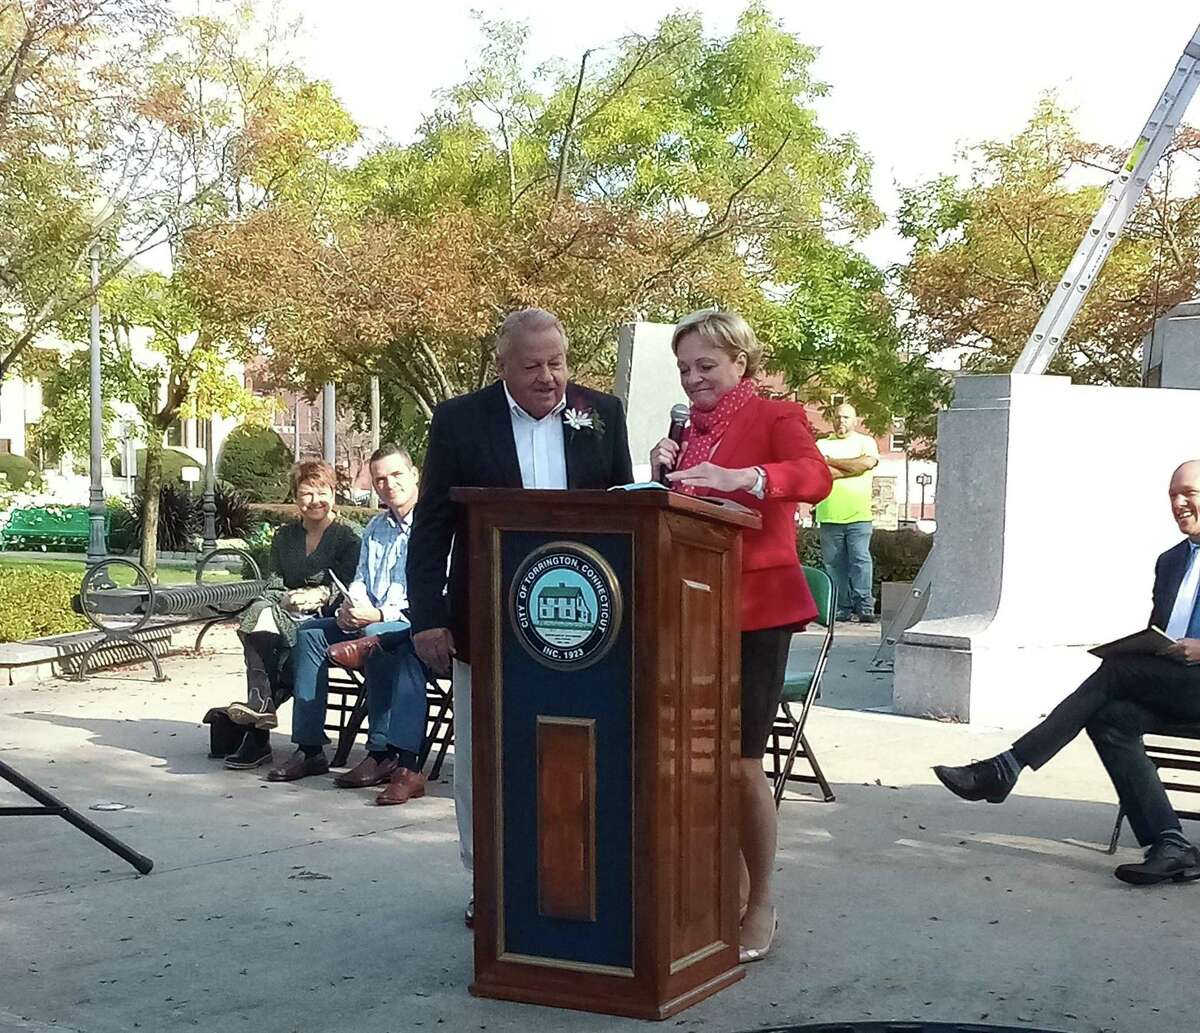 Arthur “Art” Mattiello, left, was honored Tuesday morning at Coe Memorial Park as Torrington's 2021 Italian Mayor of the Day, an award presented by Torrington UNICO members, Mayor Elinor Carbone, right, and other officials. This year's event is set for Oct. 12 at the Coe Memorial Park Civic Center at 9 a.m., honoring Victor Muschell. 